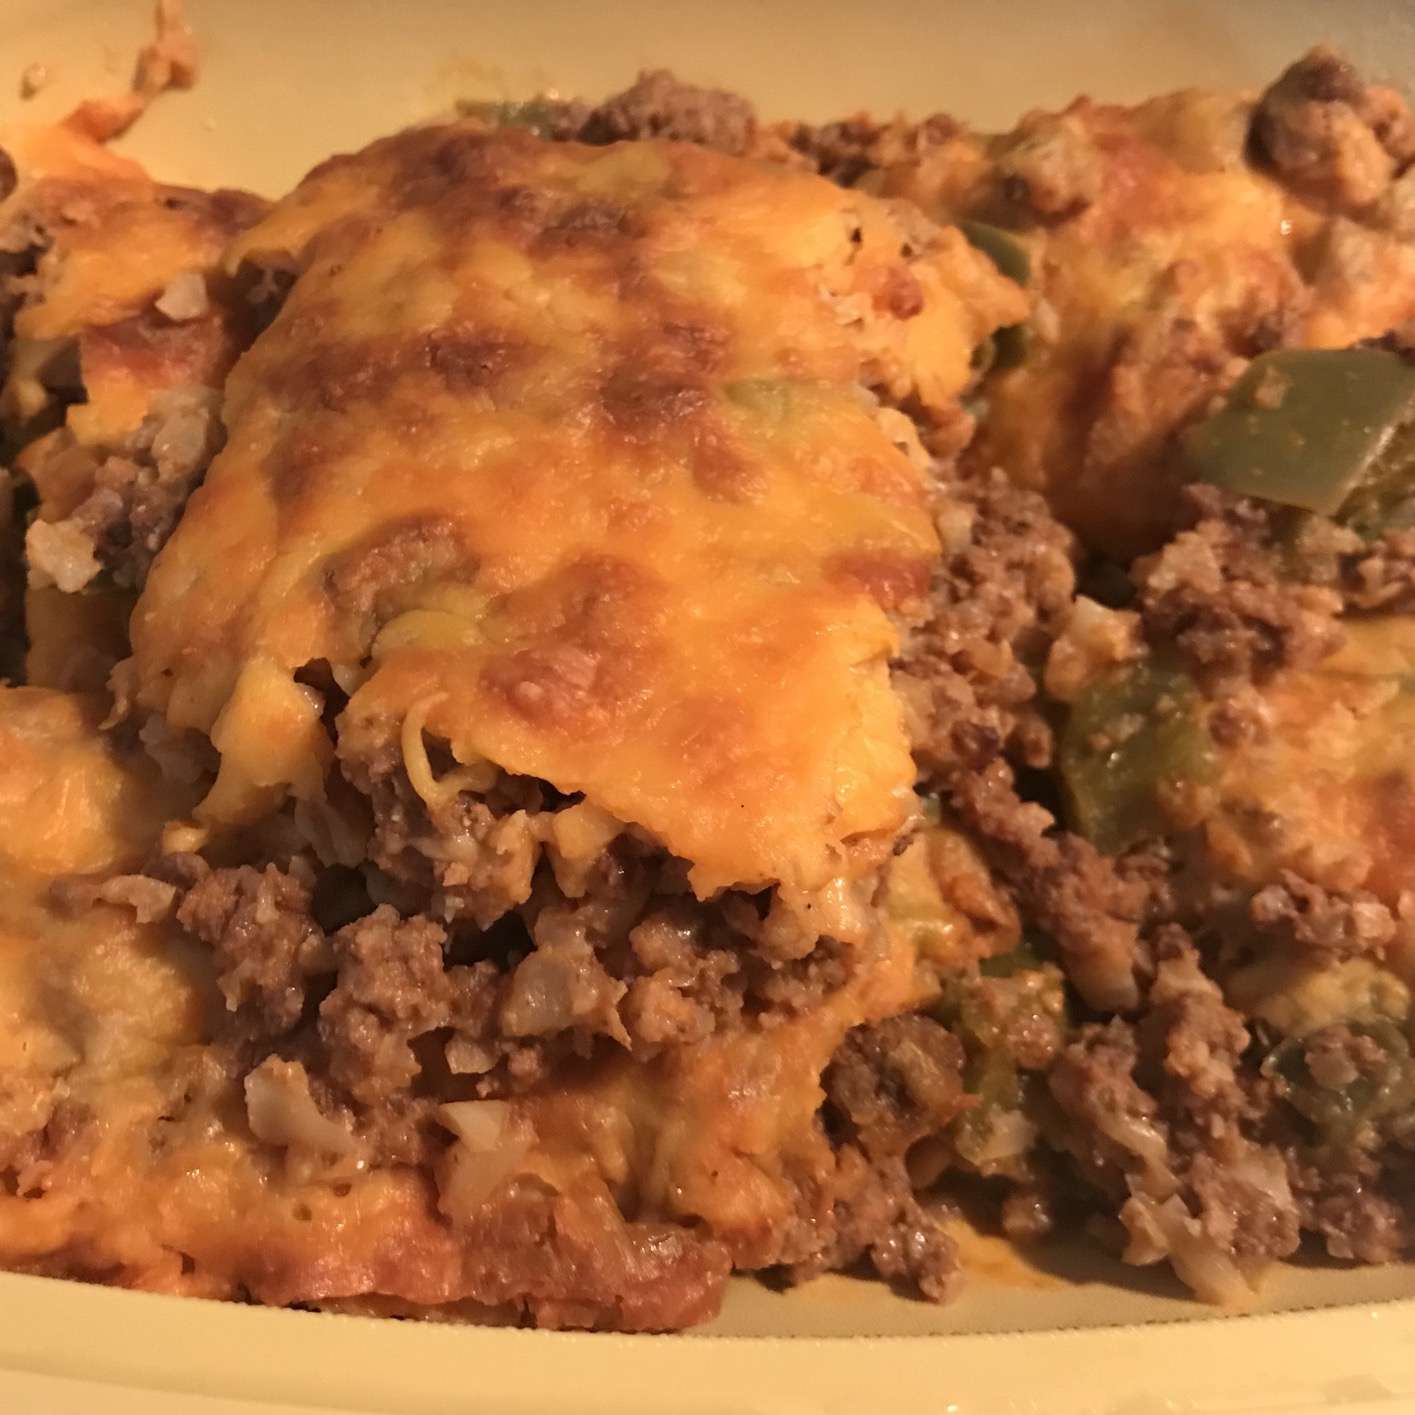 rice and ground meat casserole with cheese on top